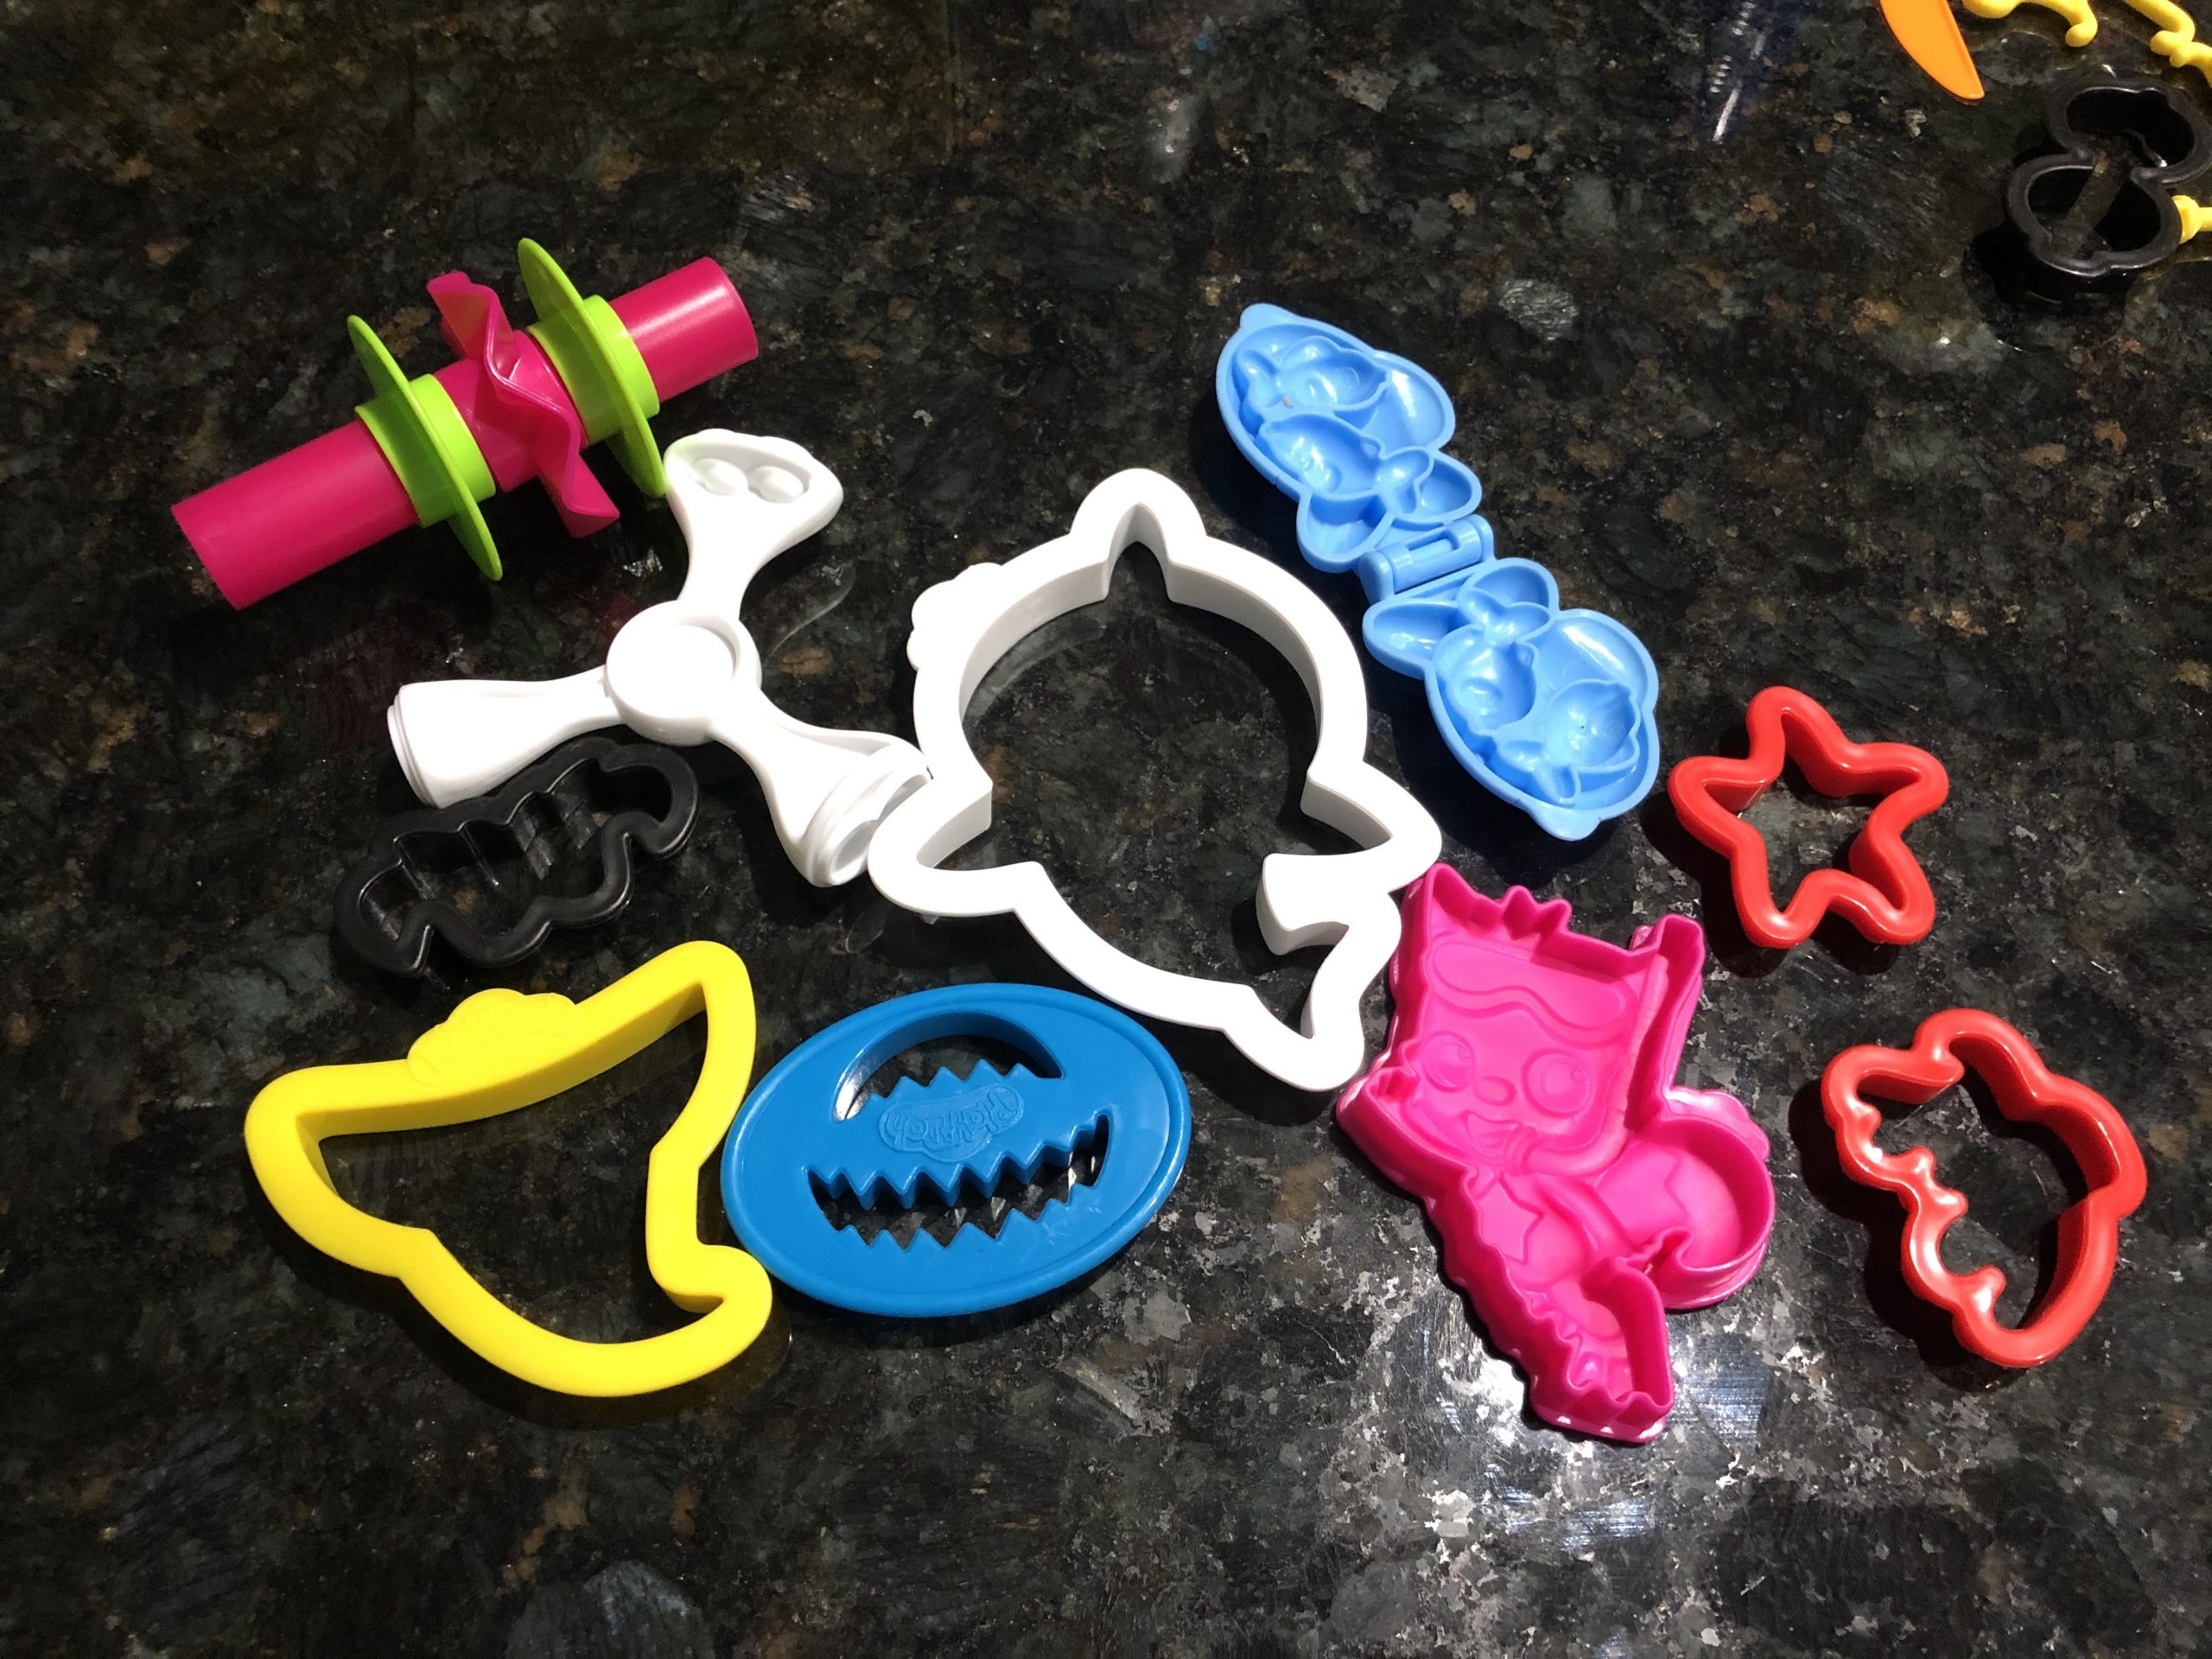 Using the Baby Shark Play-Doh set for Cakes